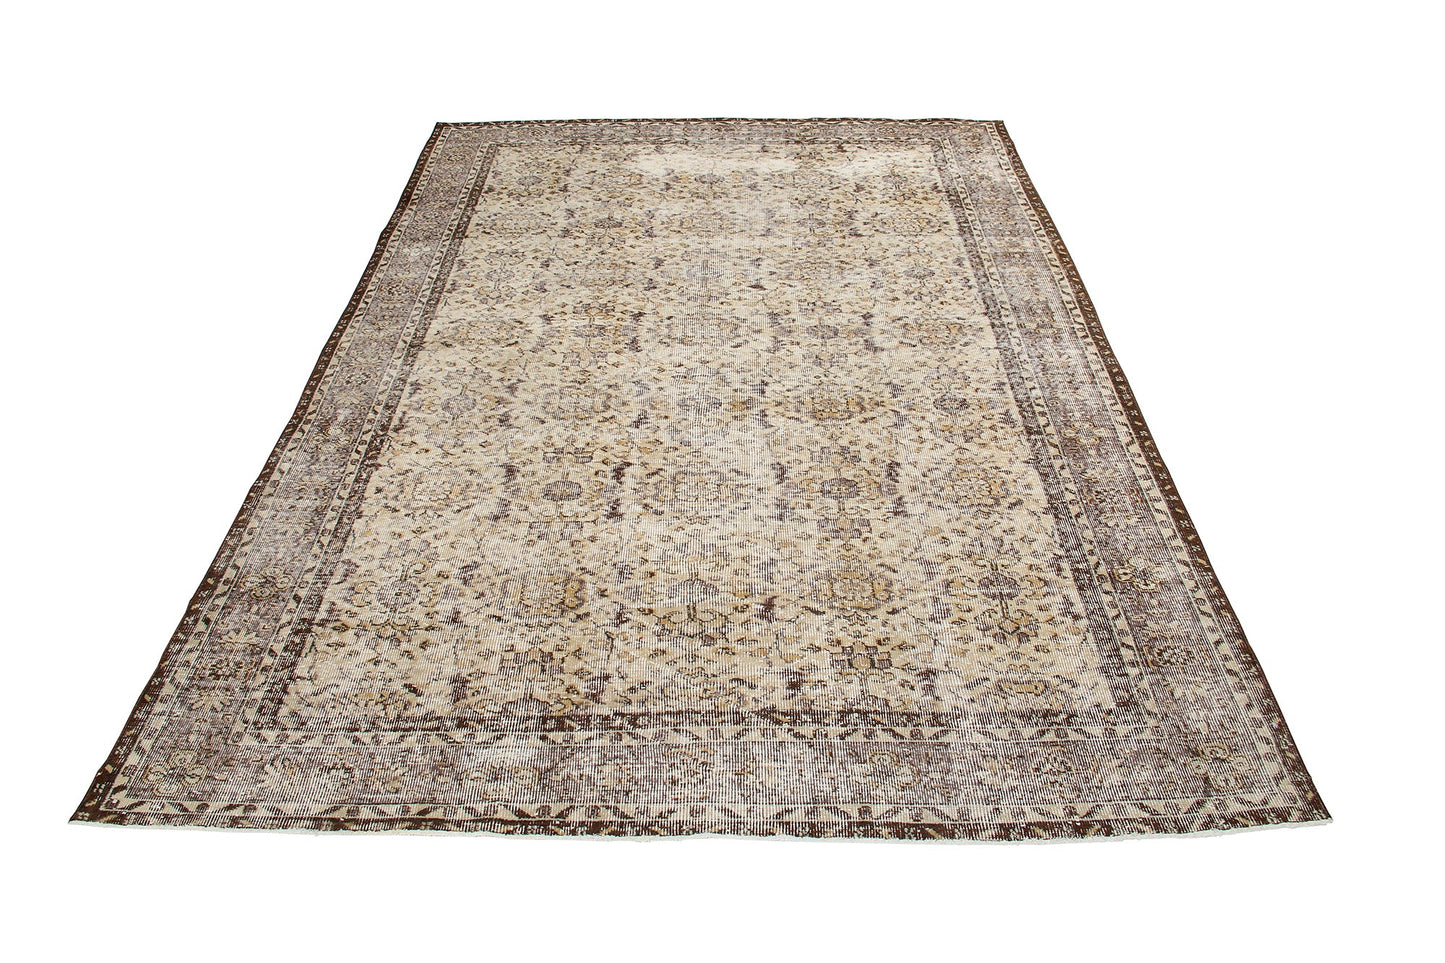 Vintage Wool Rug With a Traditional Floral Design product image #27556027203754